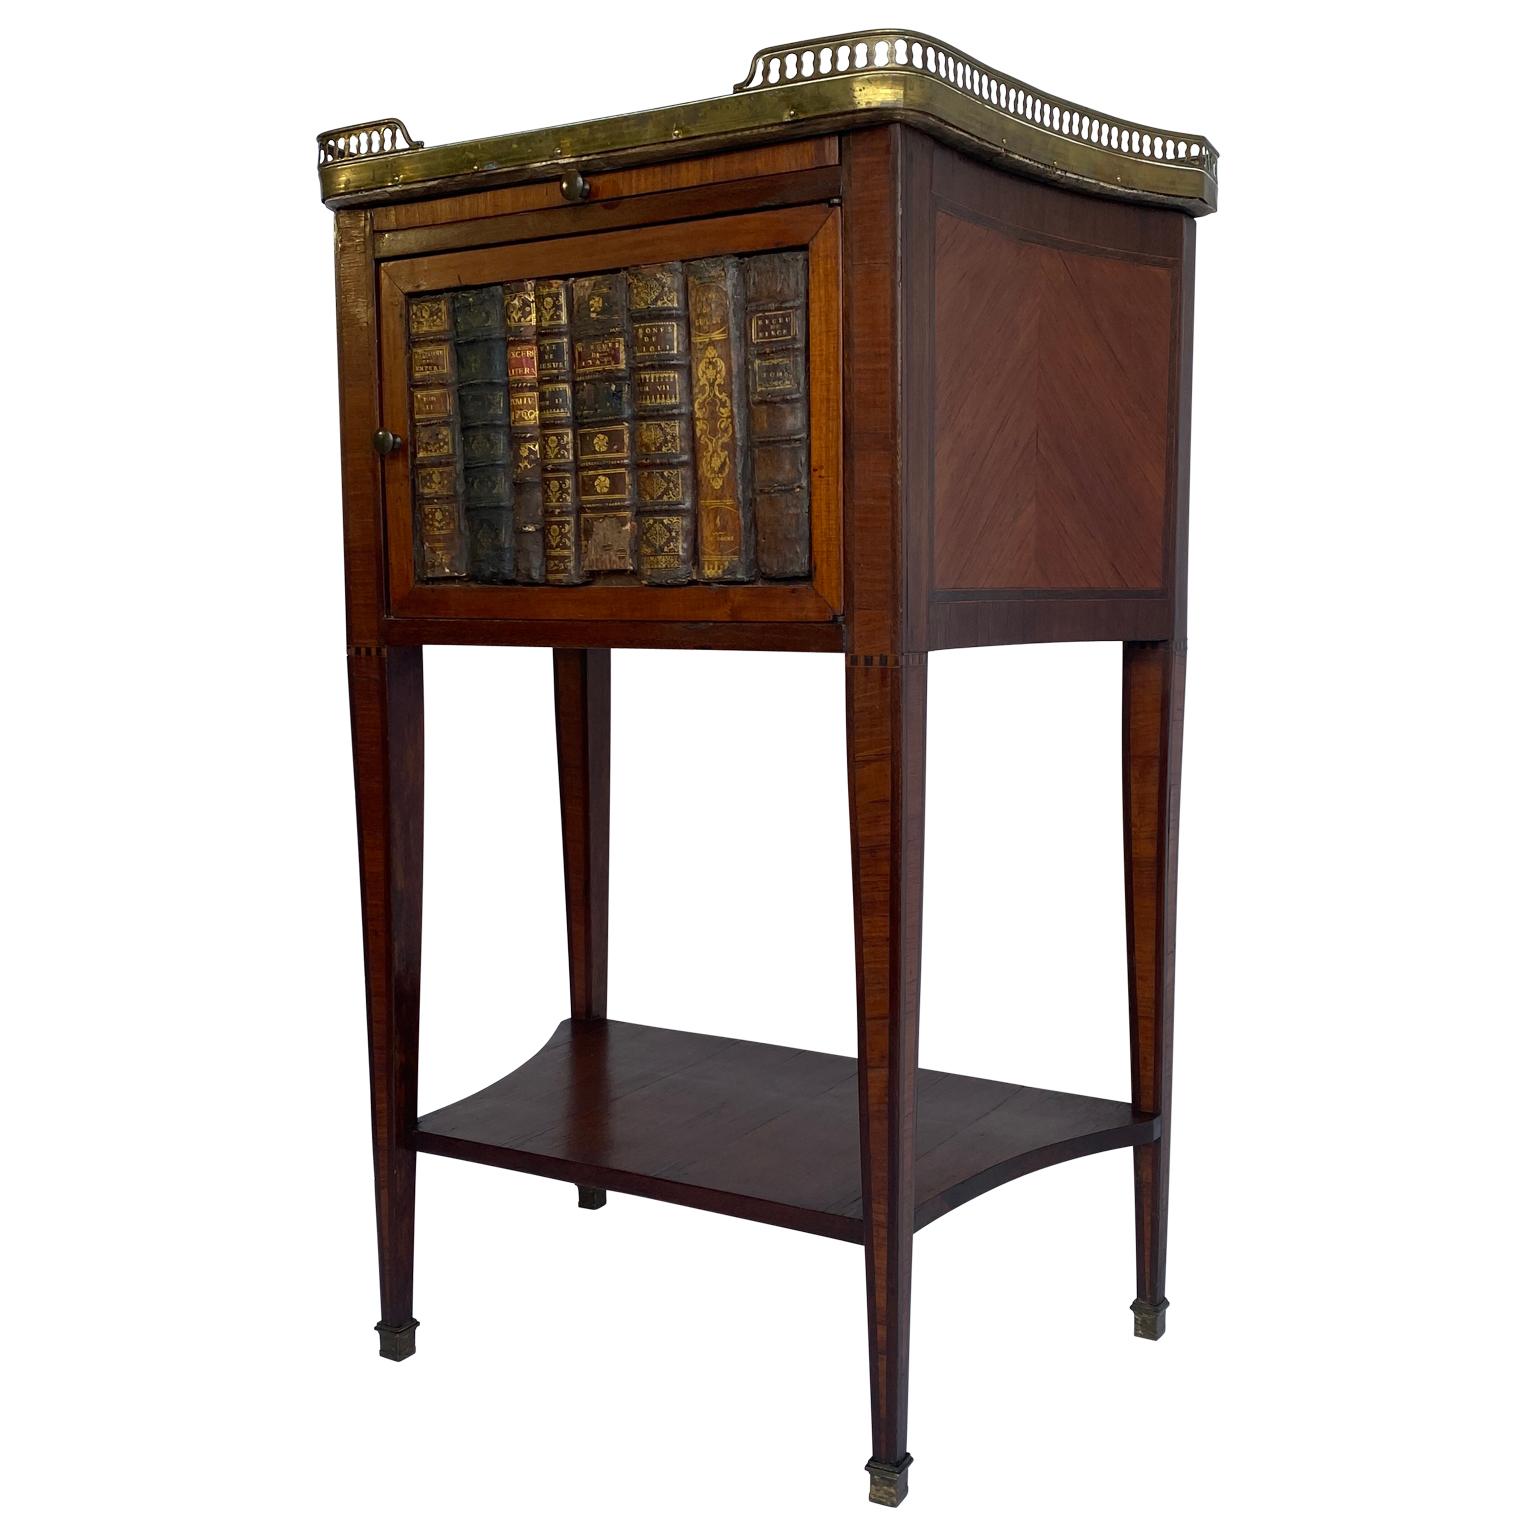 French 1860s Napoleon III period brass gallery rail side table with marble top and library bookends as decoration.
Hand written provenance on the rear side: 